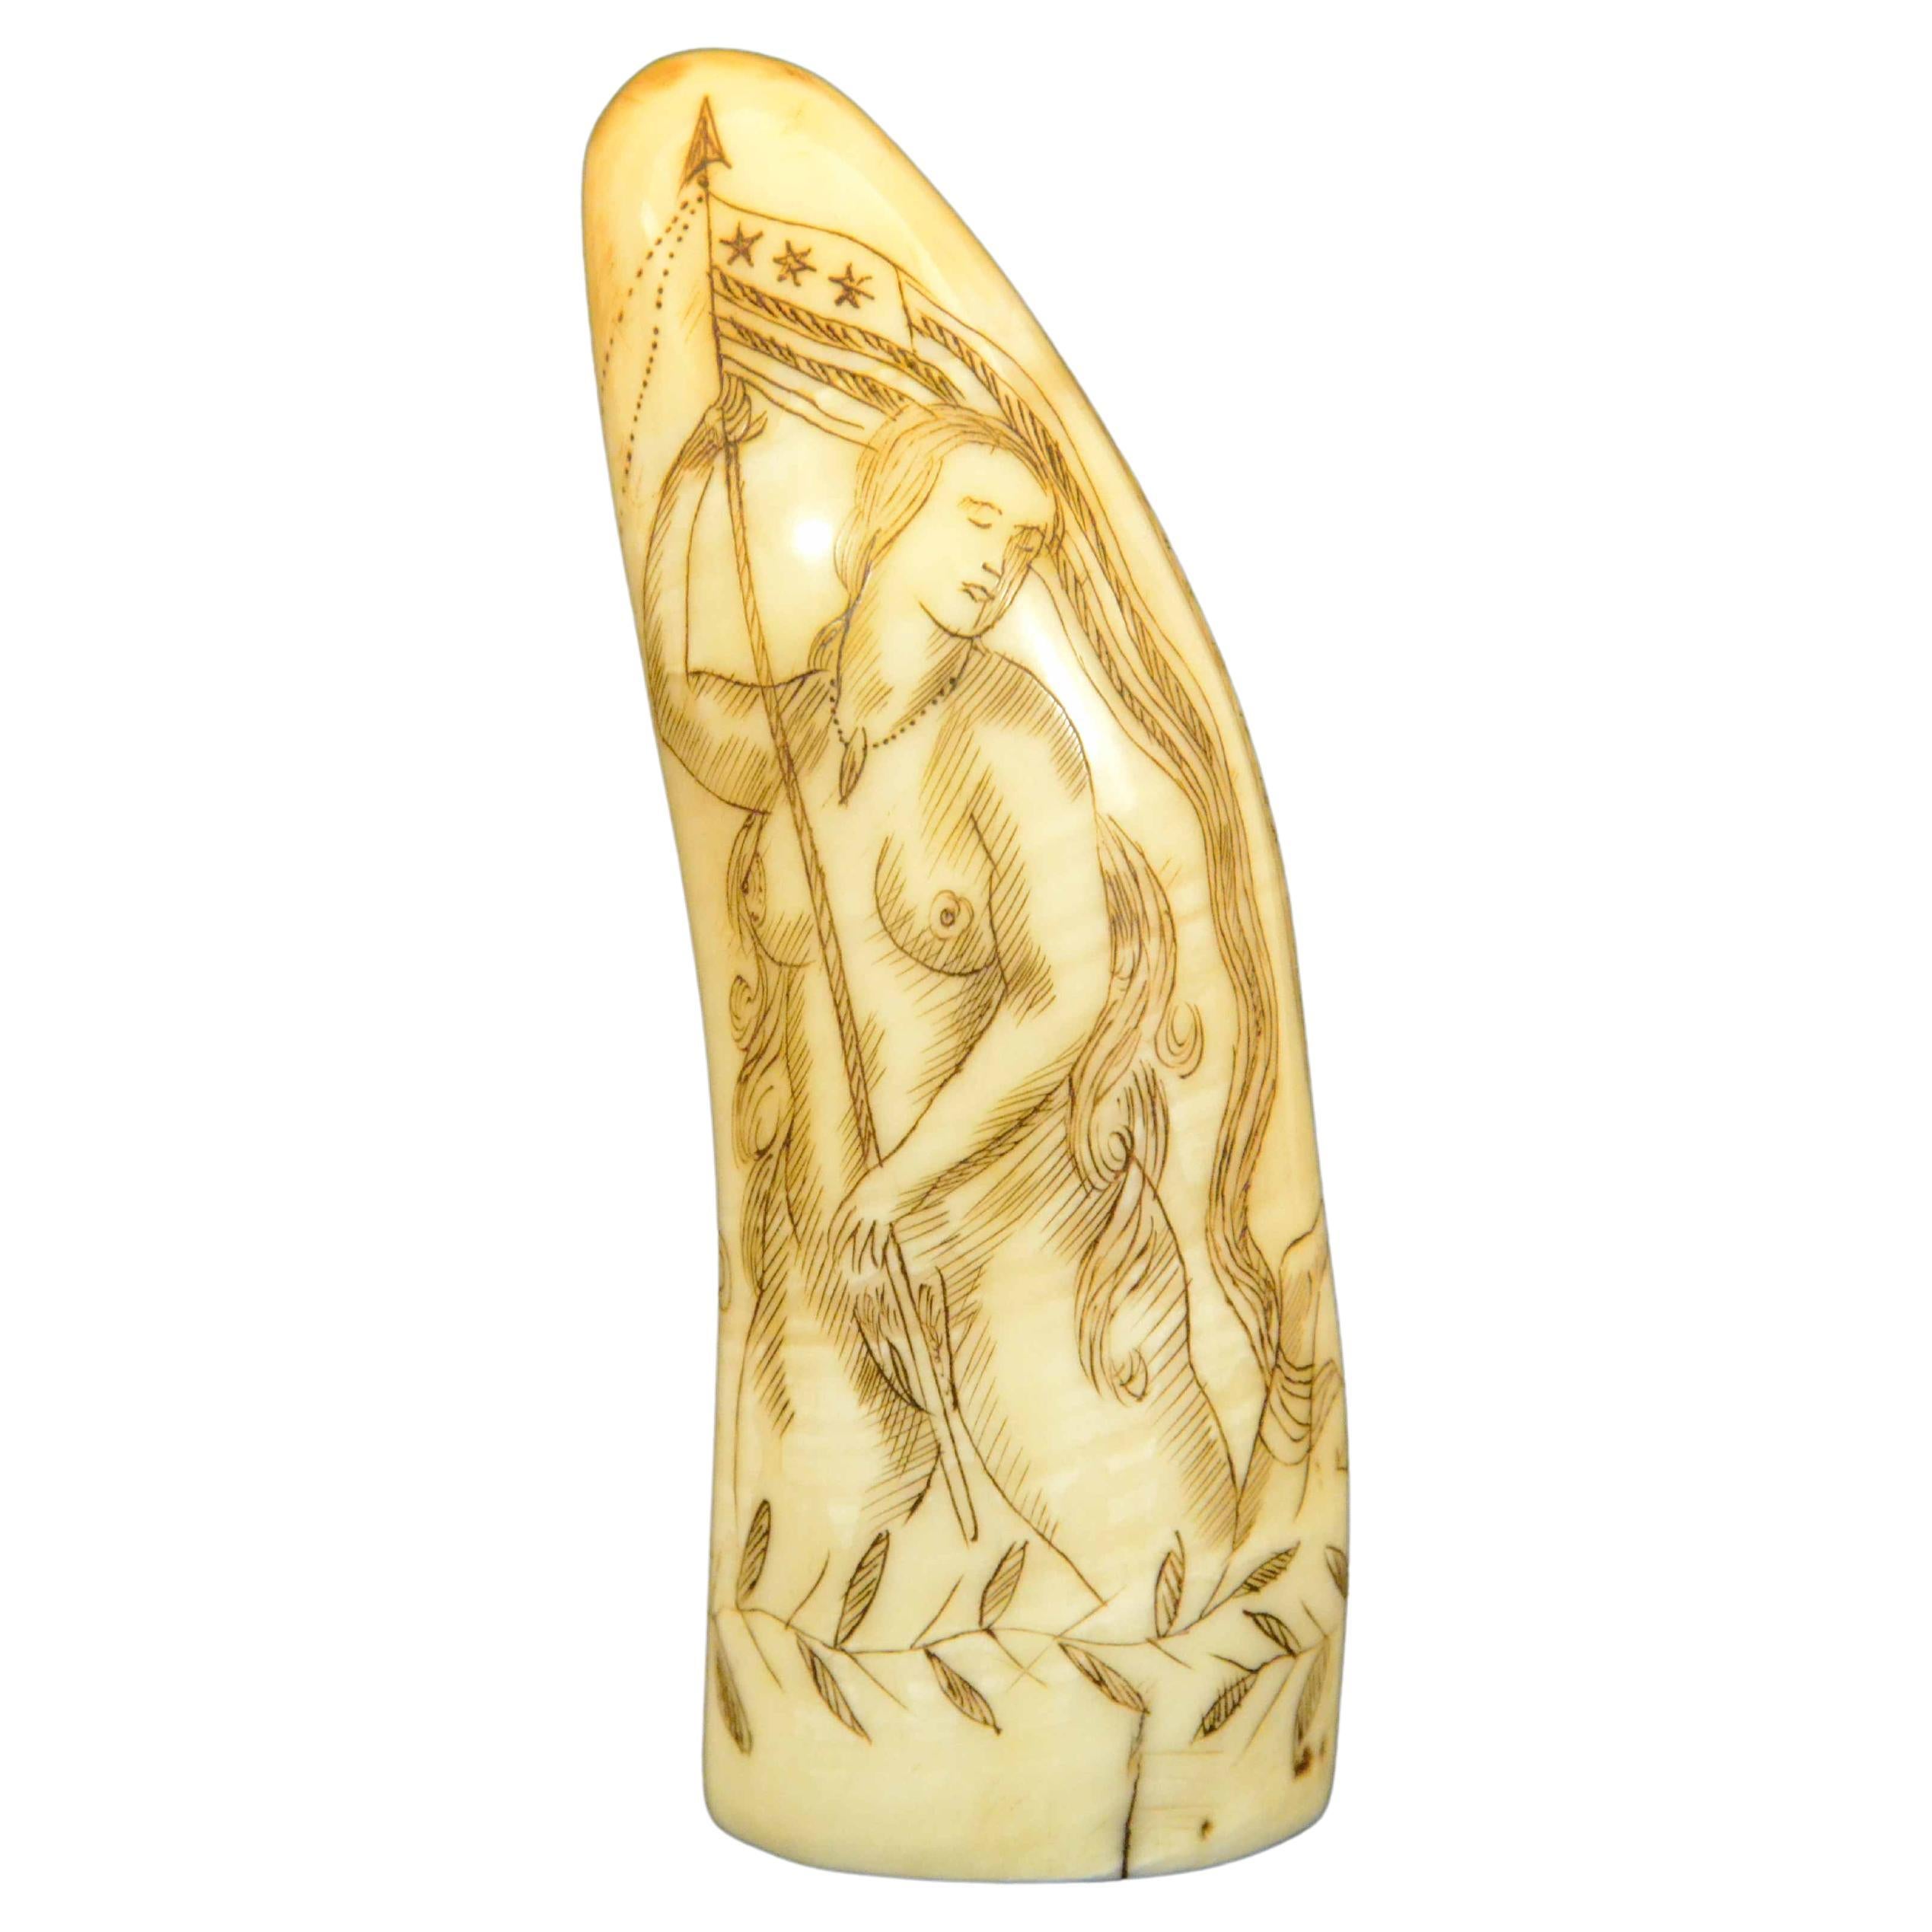 Scrimshaw of engraved whale tooth depicting naked woman with very 1850s face For Sale